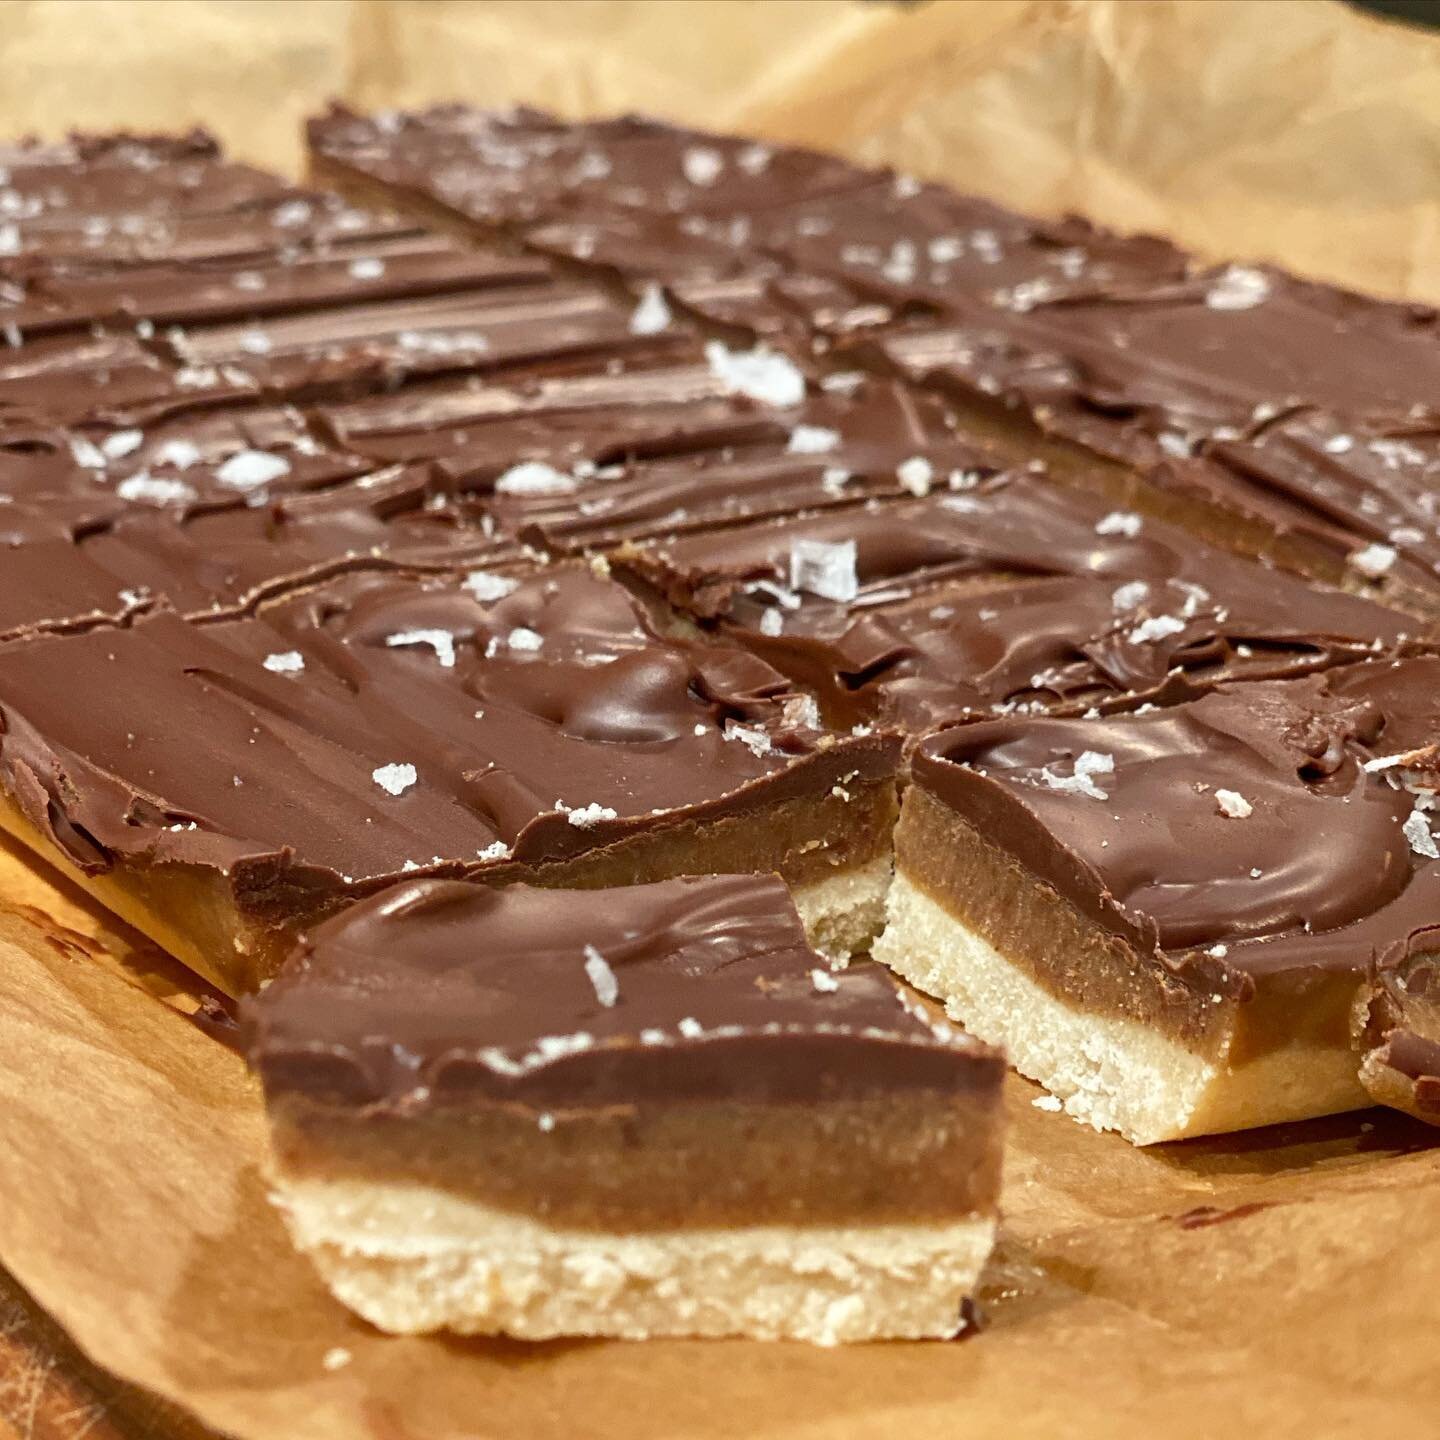 I admit that my all time favorite guilty pleasure is a good old Twix bar.. until I found out I can make my own vegan and gluten free homemade &lsquo;healthier&rsquo; version... 
Recipe adapted from @rachaelsgoodeats 
Check my BIO for the recipeeeee ?